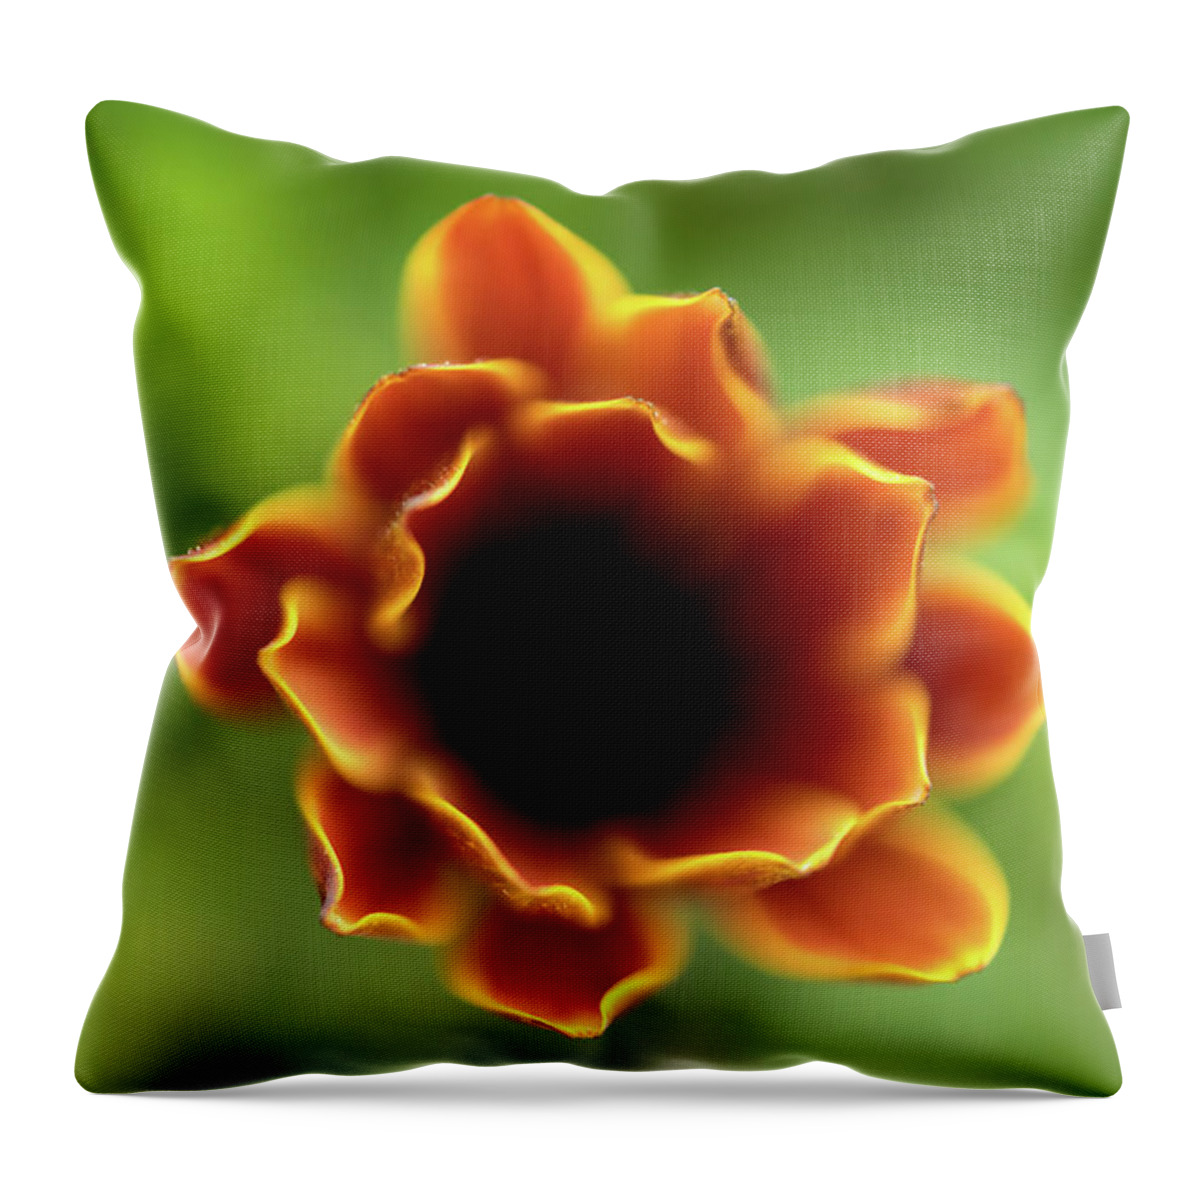 Flowers Throw Pillow featuring the photograph Soft Flames by Alicia Glassmeyer